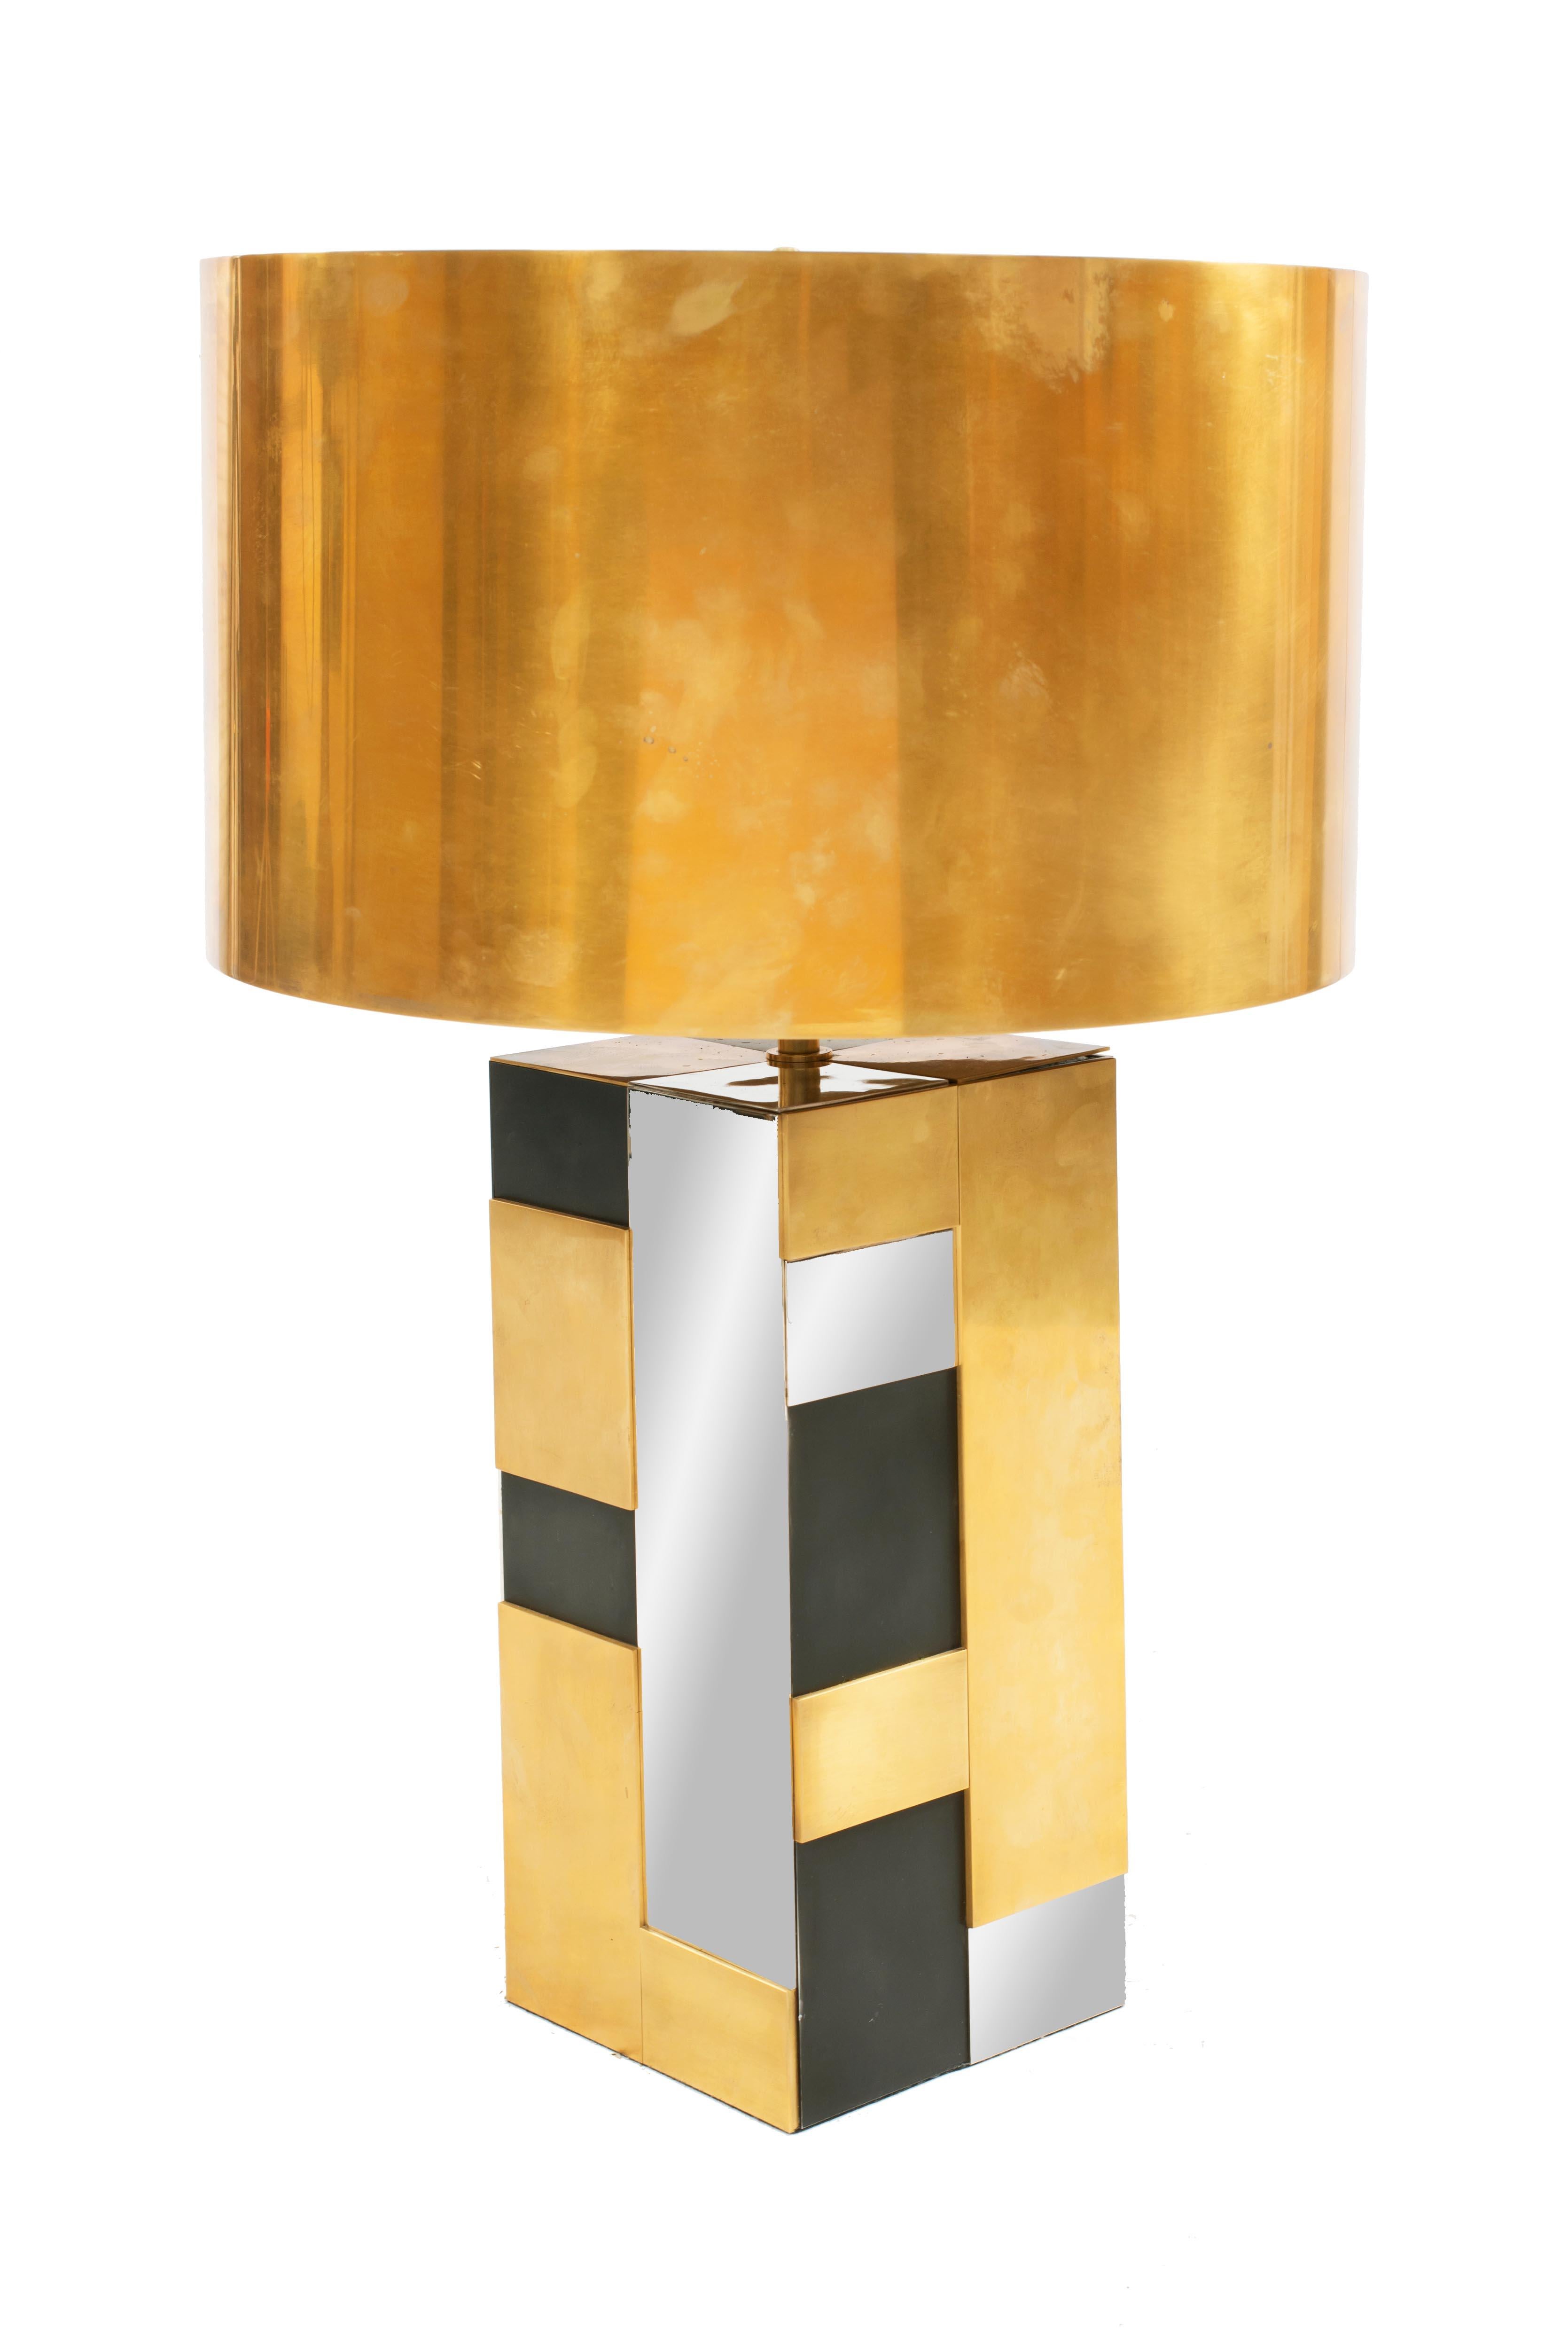 Contemporary brass, bronze, polished nickel, and black metal table lamp with faceted square detail & a burnished brass drum shade.
     